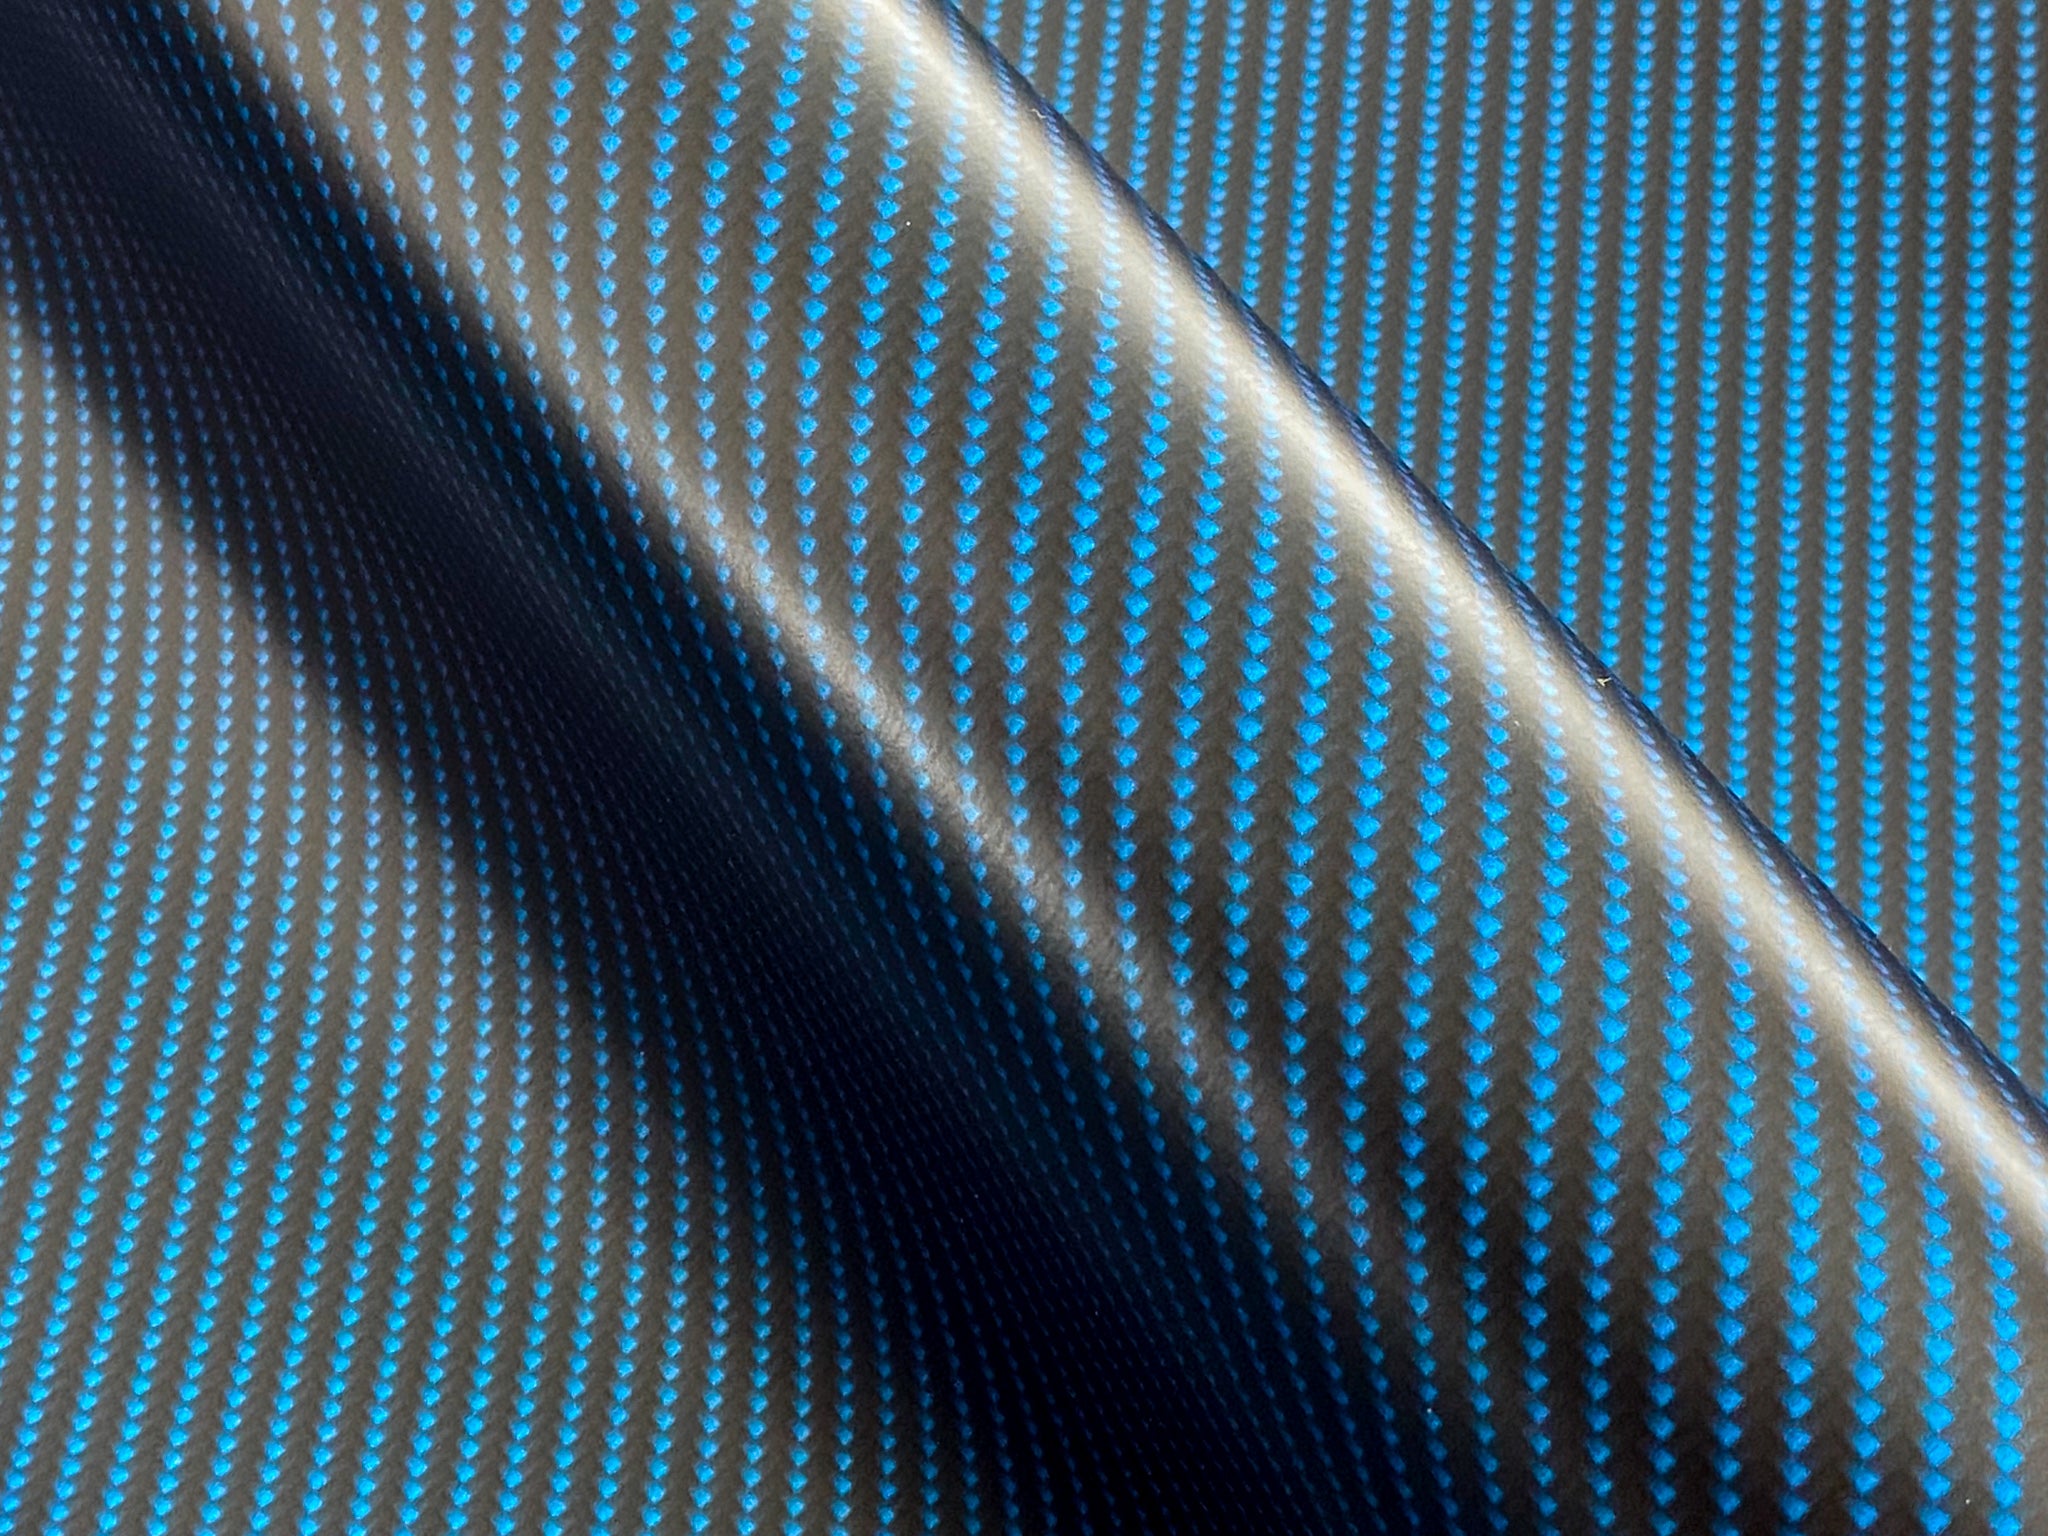 WRPD. Twill Weave Midnight Blue Carbon Fibre Vinyl Wrap - Car Wrapping Film  – WRPD INC.